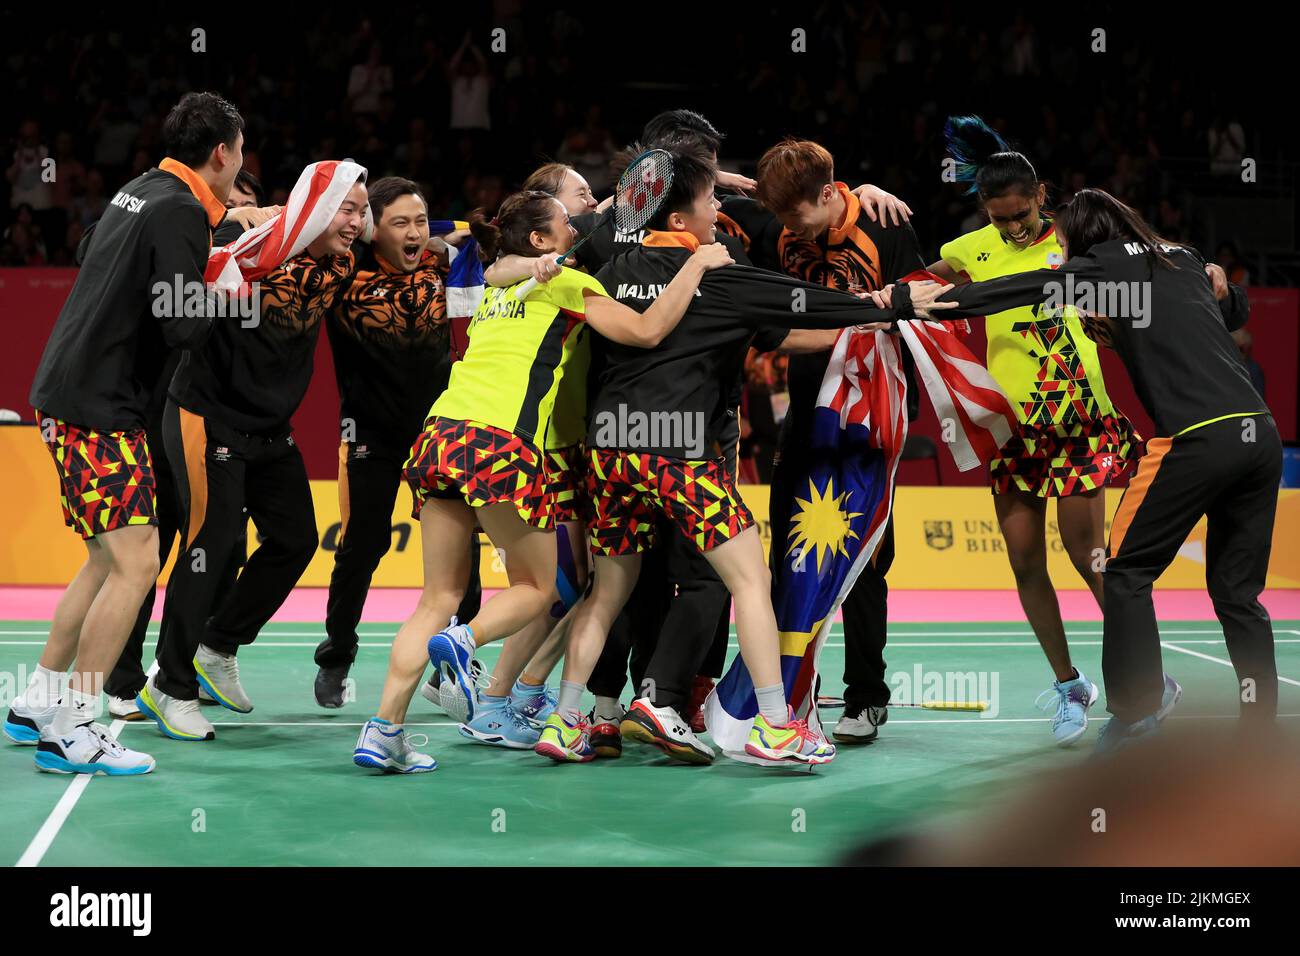 Team Malaysia celebrate winning a gold medal in Badminton Team at The NEC on day five of 2022 Commonwealth Games in Birmingham